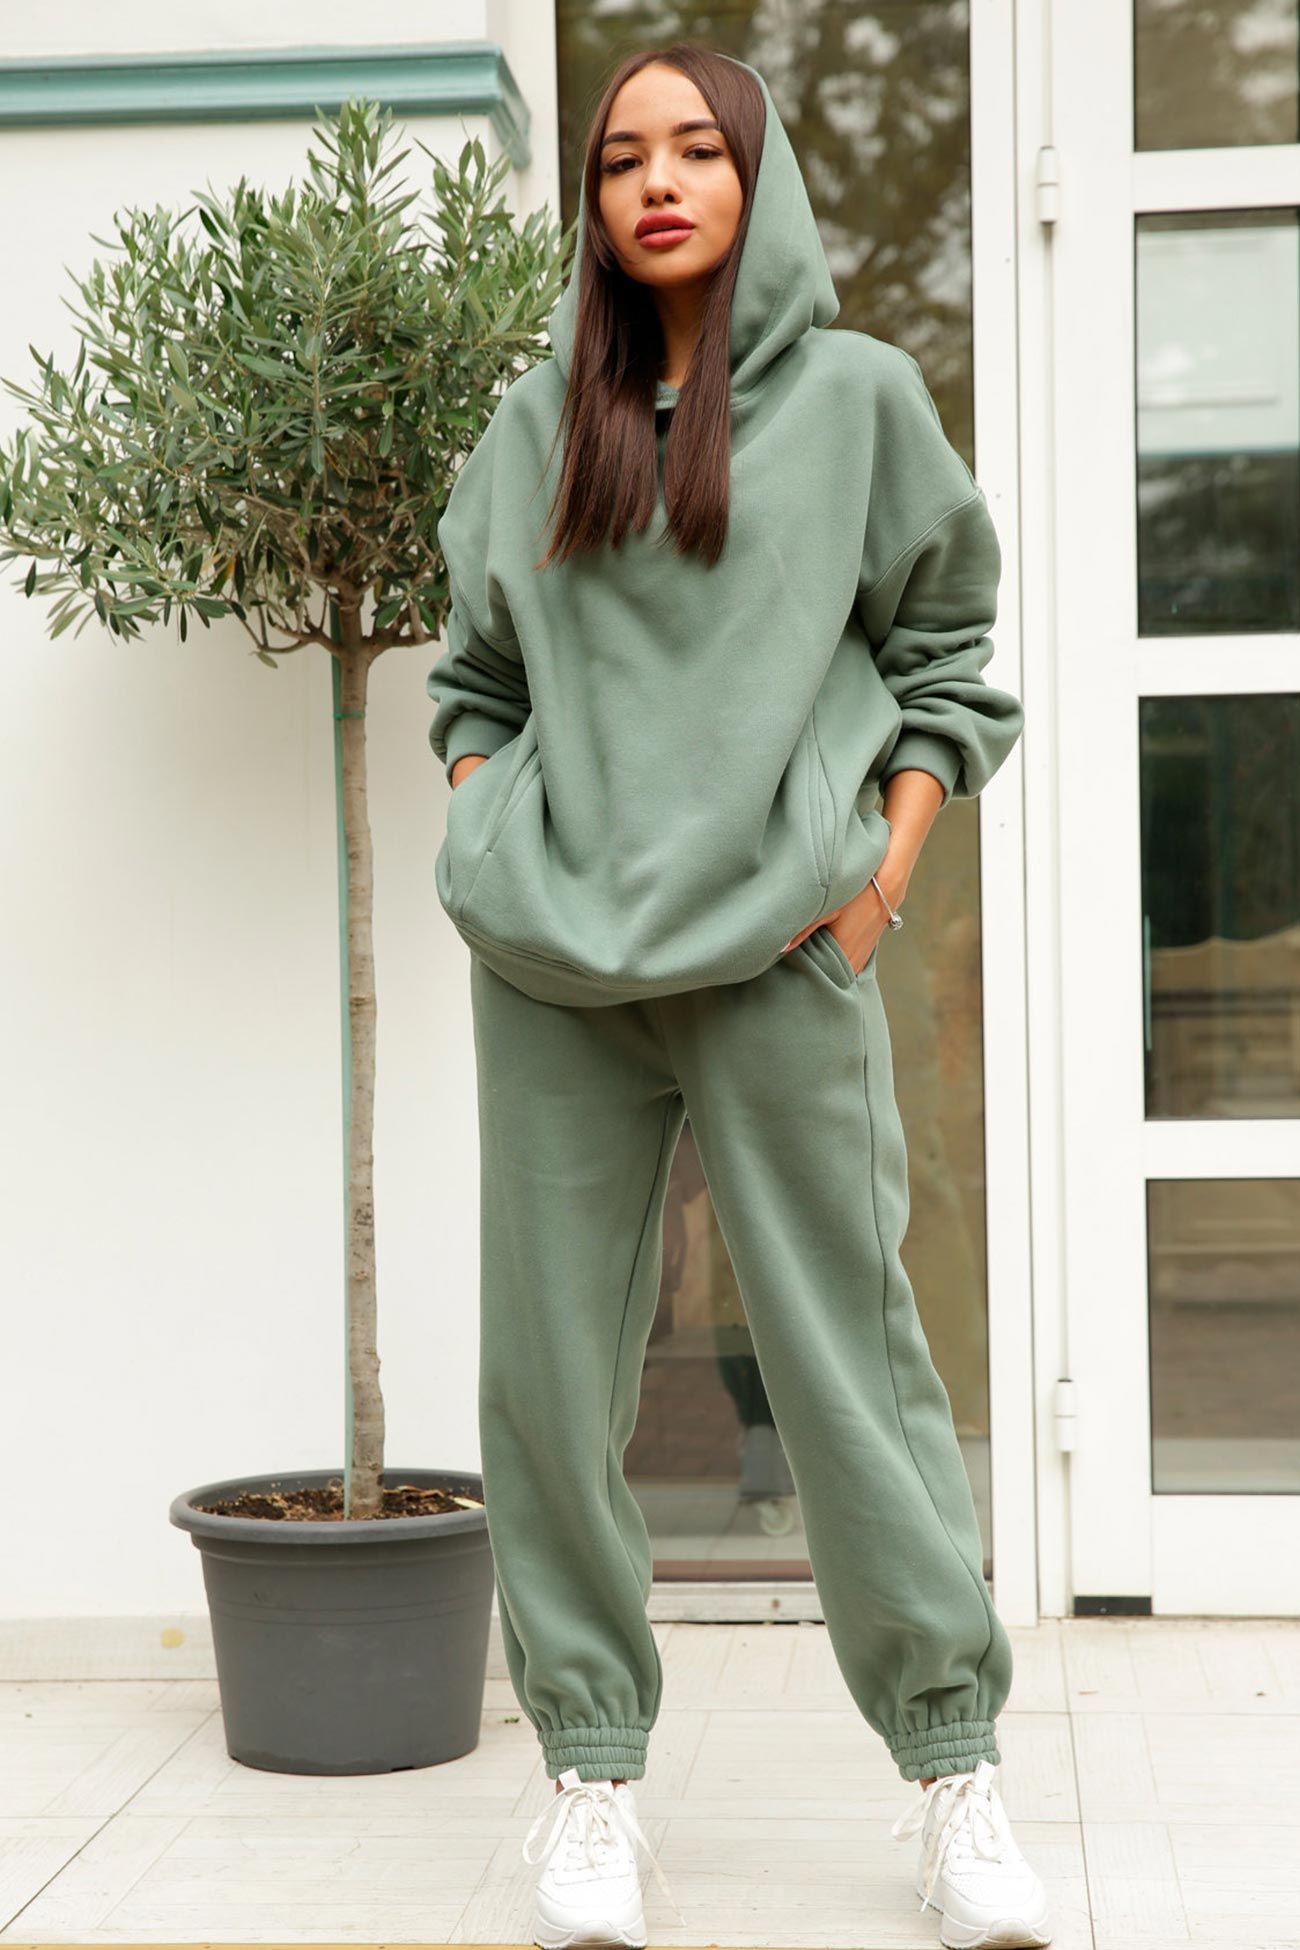 Try new trends and designs of Sweat suits
for women